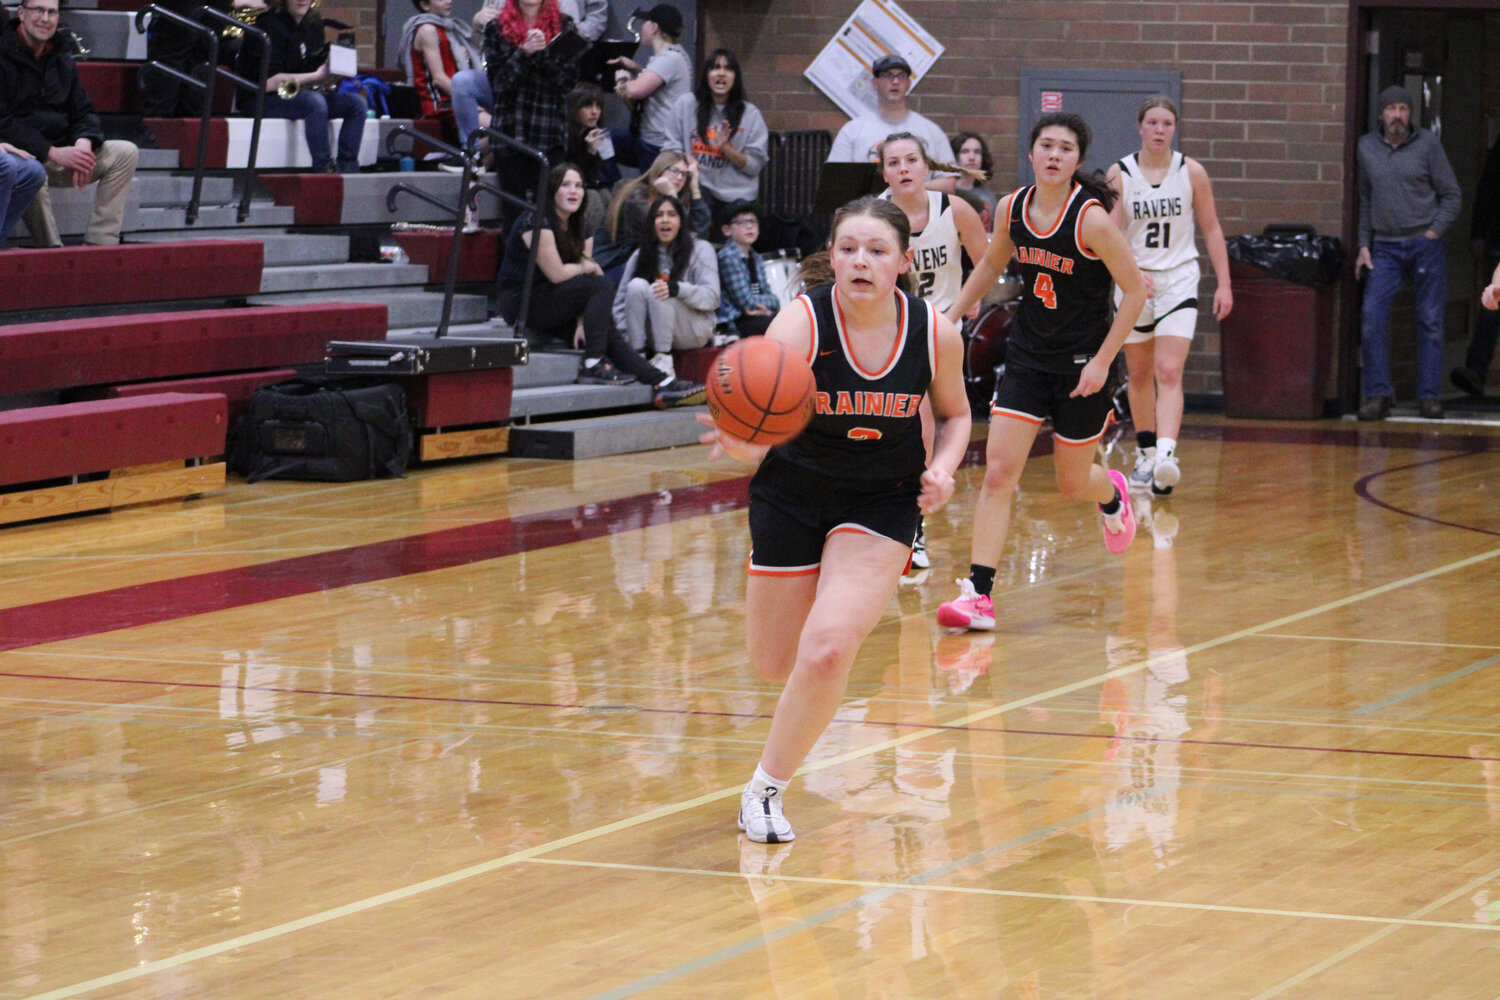 Brooklynn Swenson races down the floor before laying in a buzzer-beating shot to close the first half against Raymond-South Bend on Feb. 6.